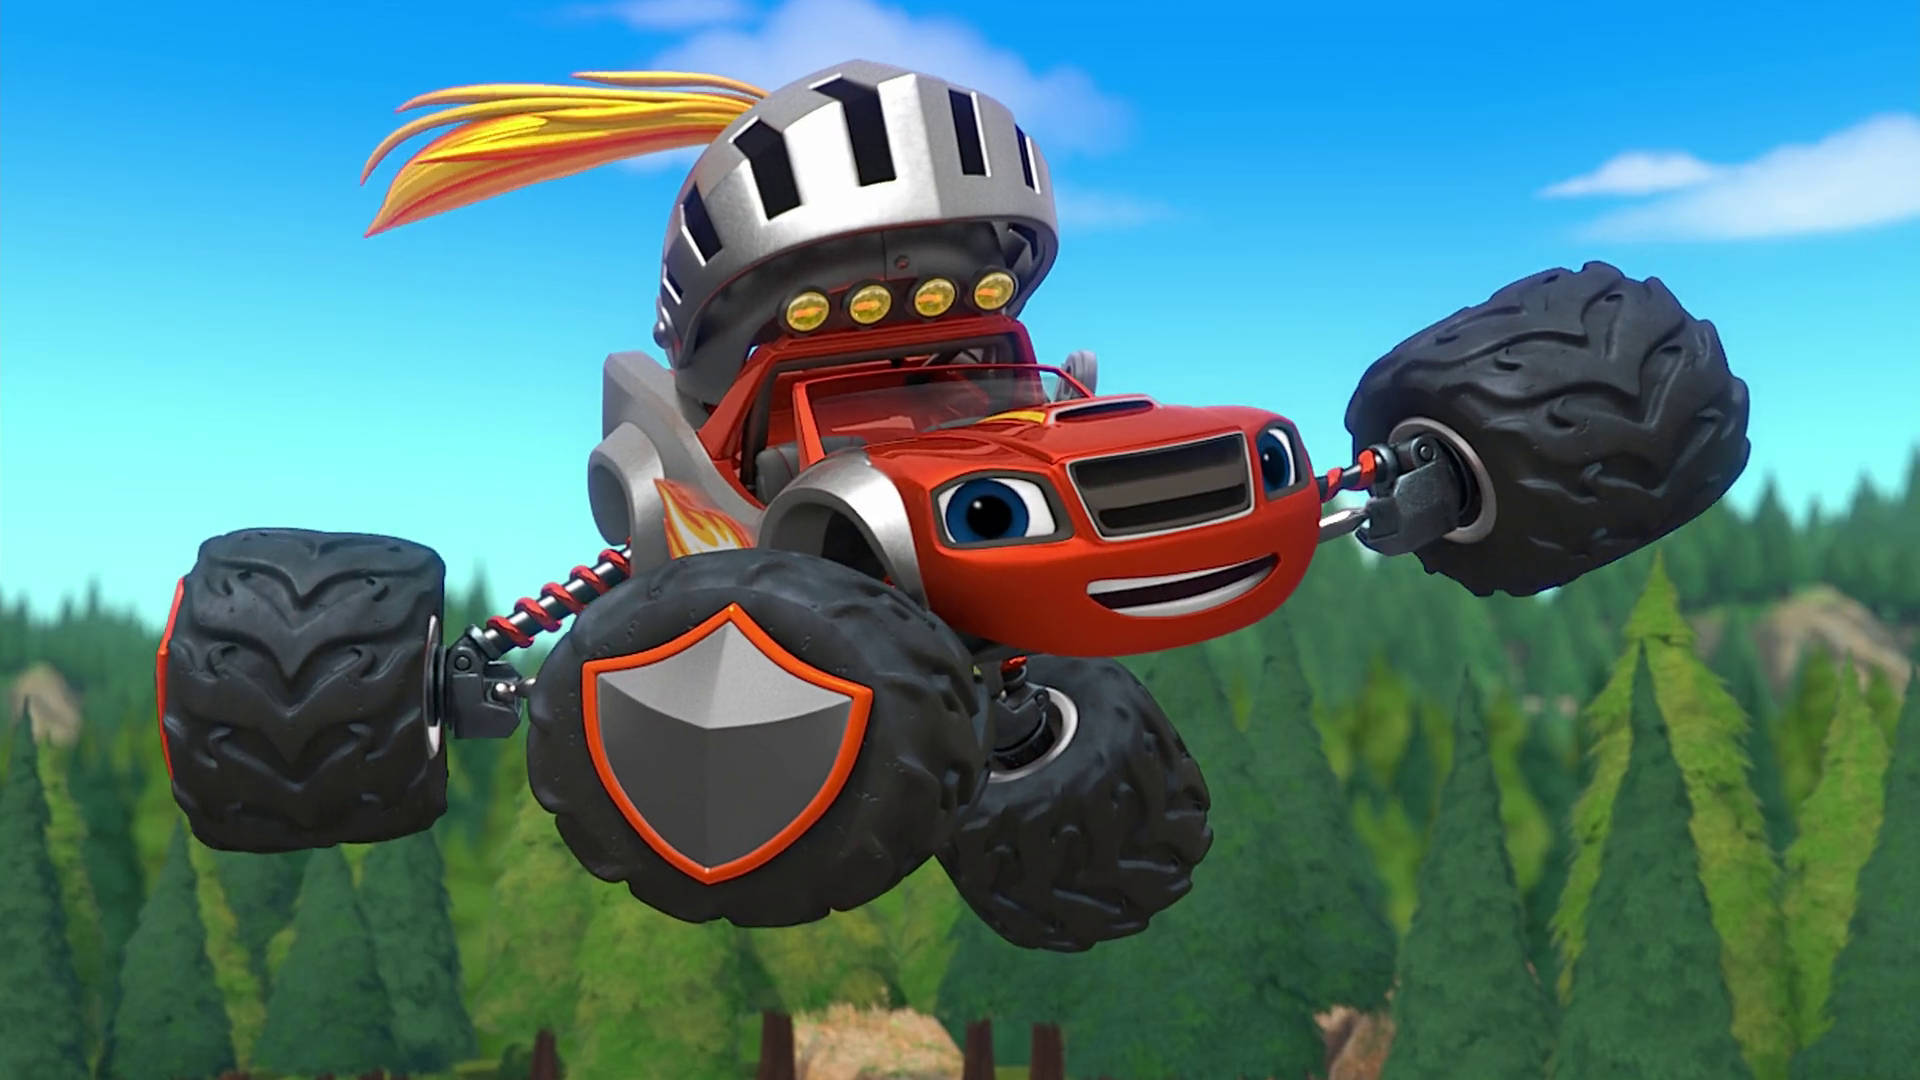 Download Blaze And The Monster Machines Knight Wallpaper 